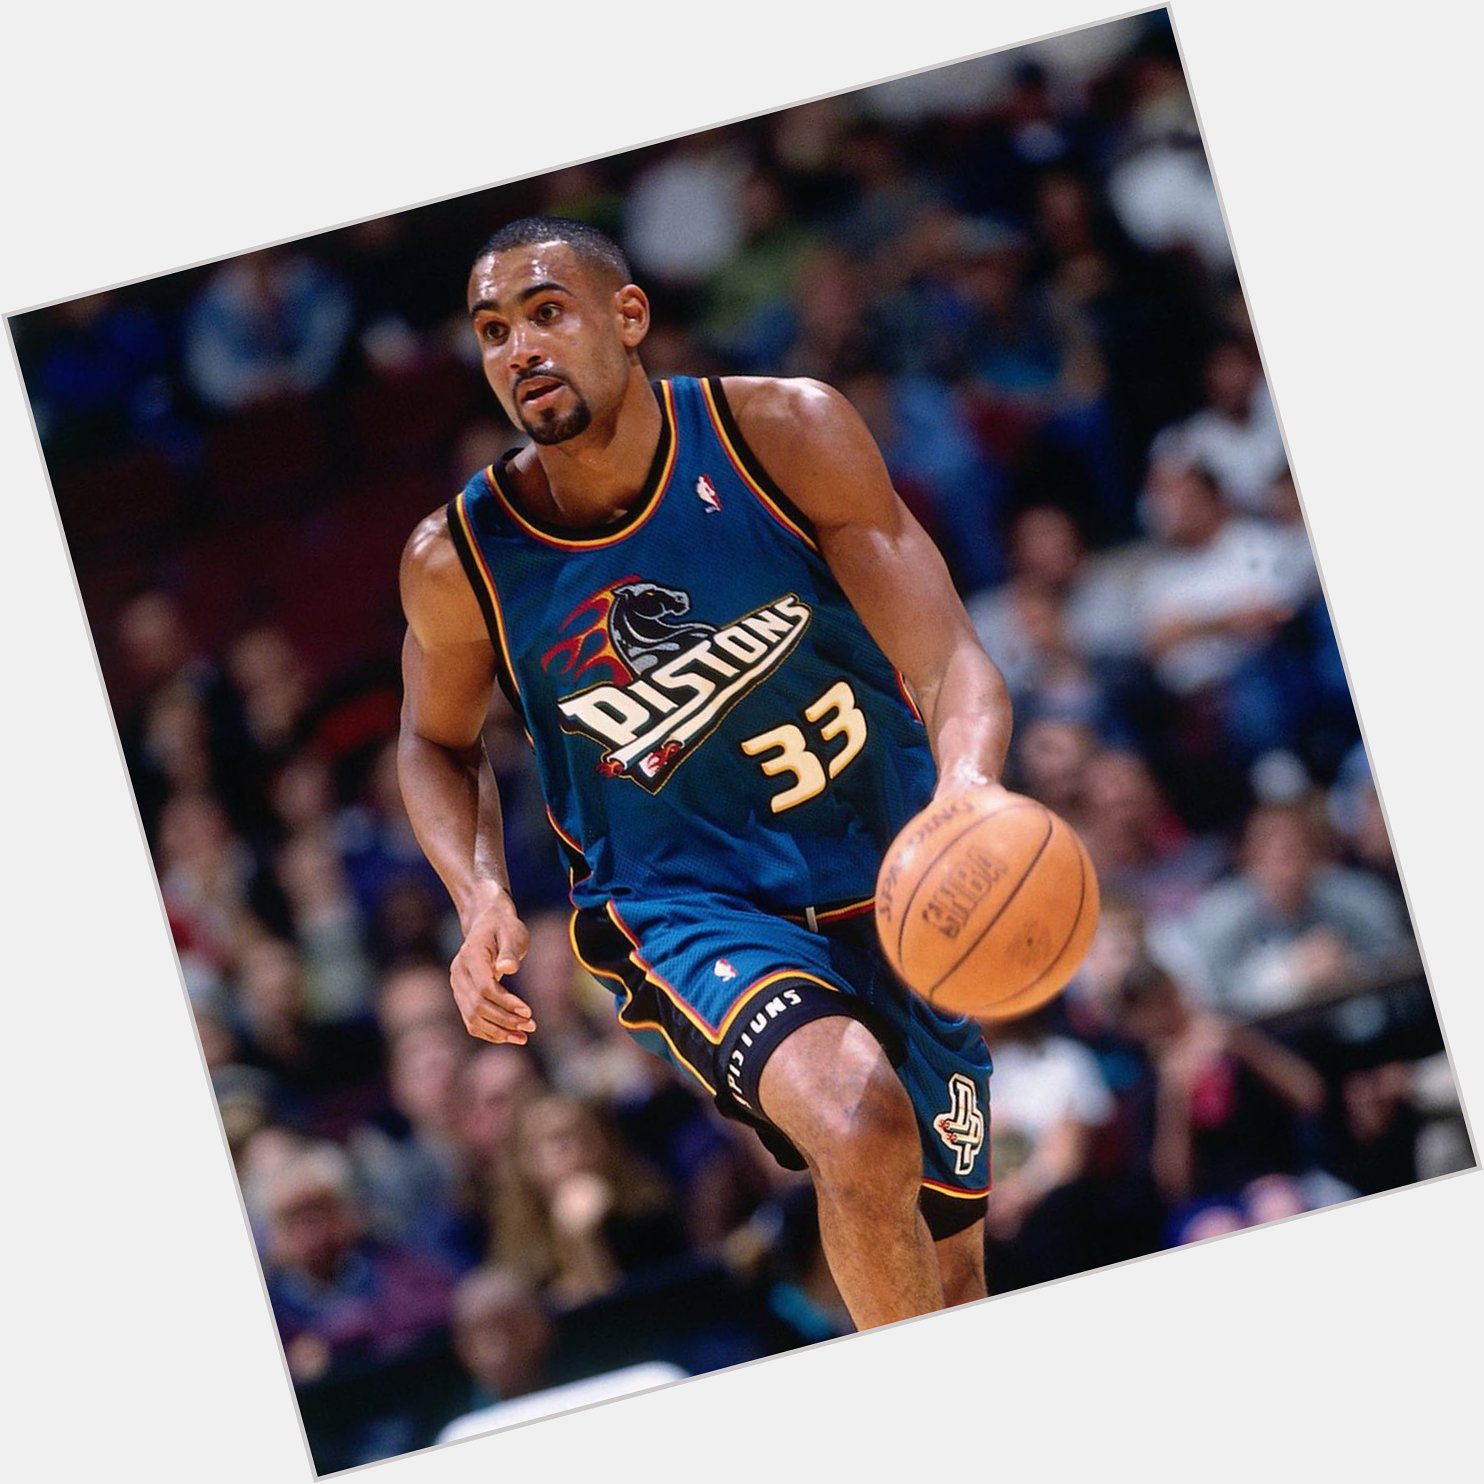 Happy Birthday to board member and 2018 inductee, Grant Hill! 